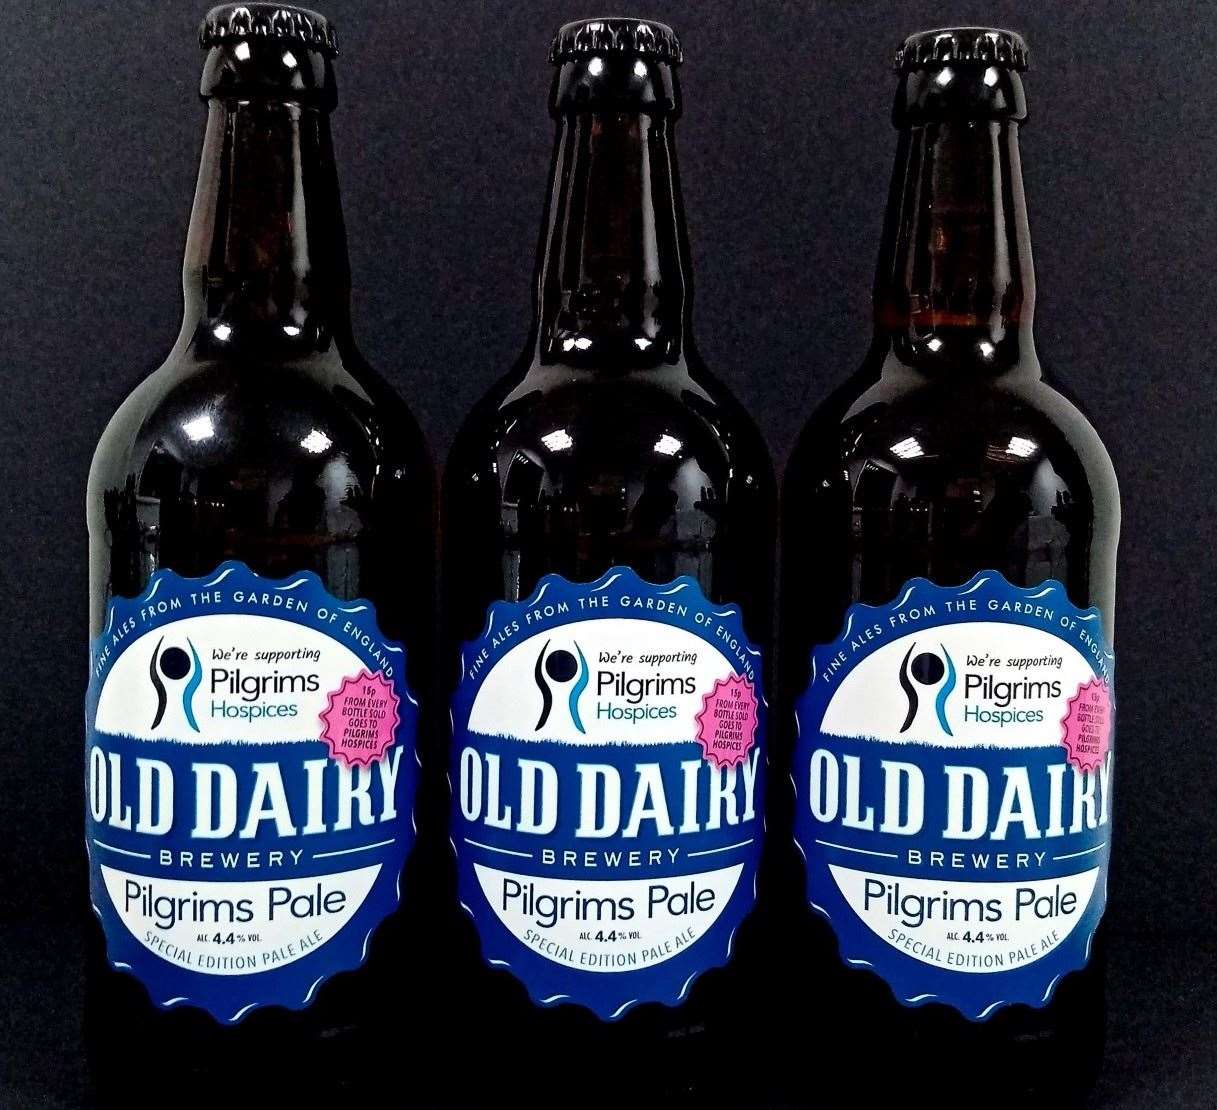 The Old Dairy Brewery's Pilgrims Pale